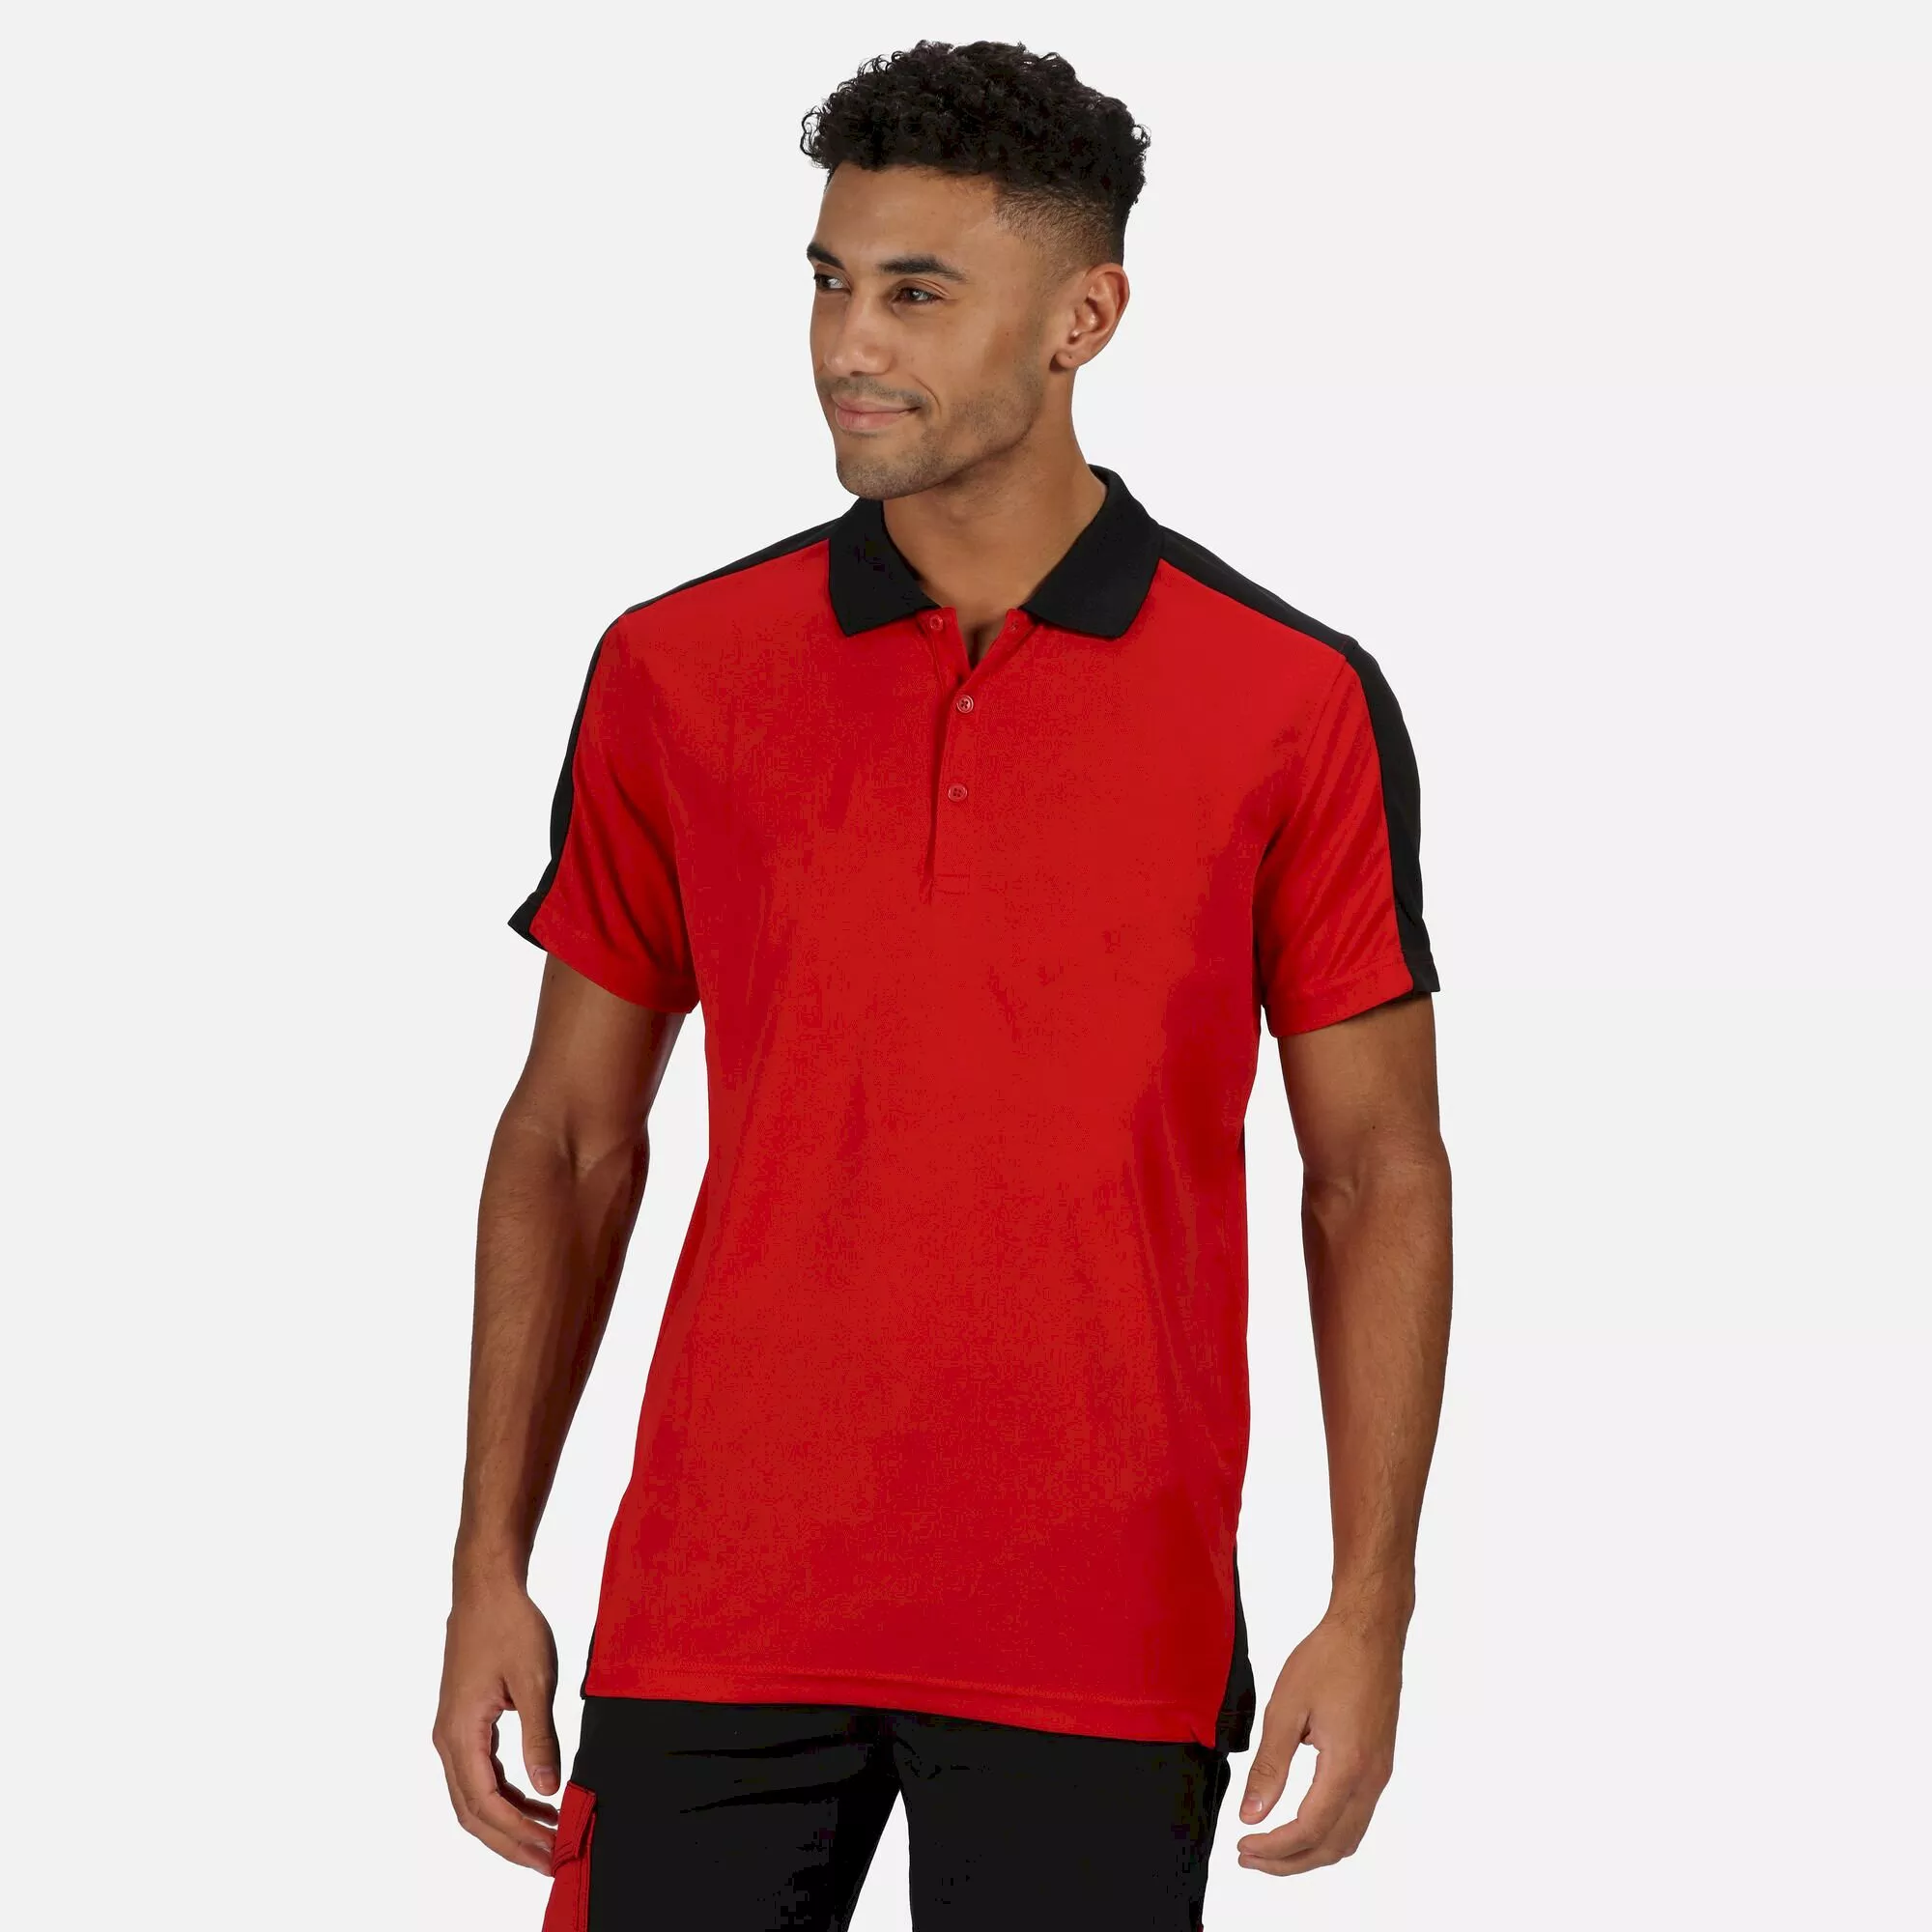 Men's Contrast Coolweave Quick Wicking Polo Shirt - Classic Red Black